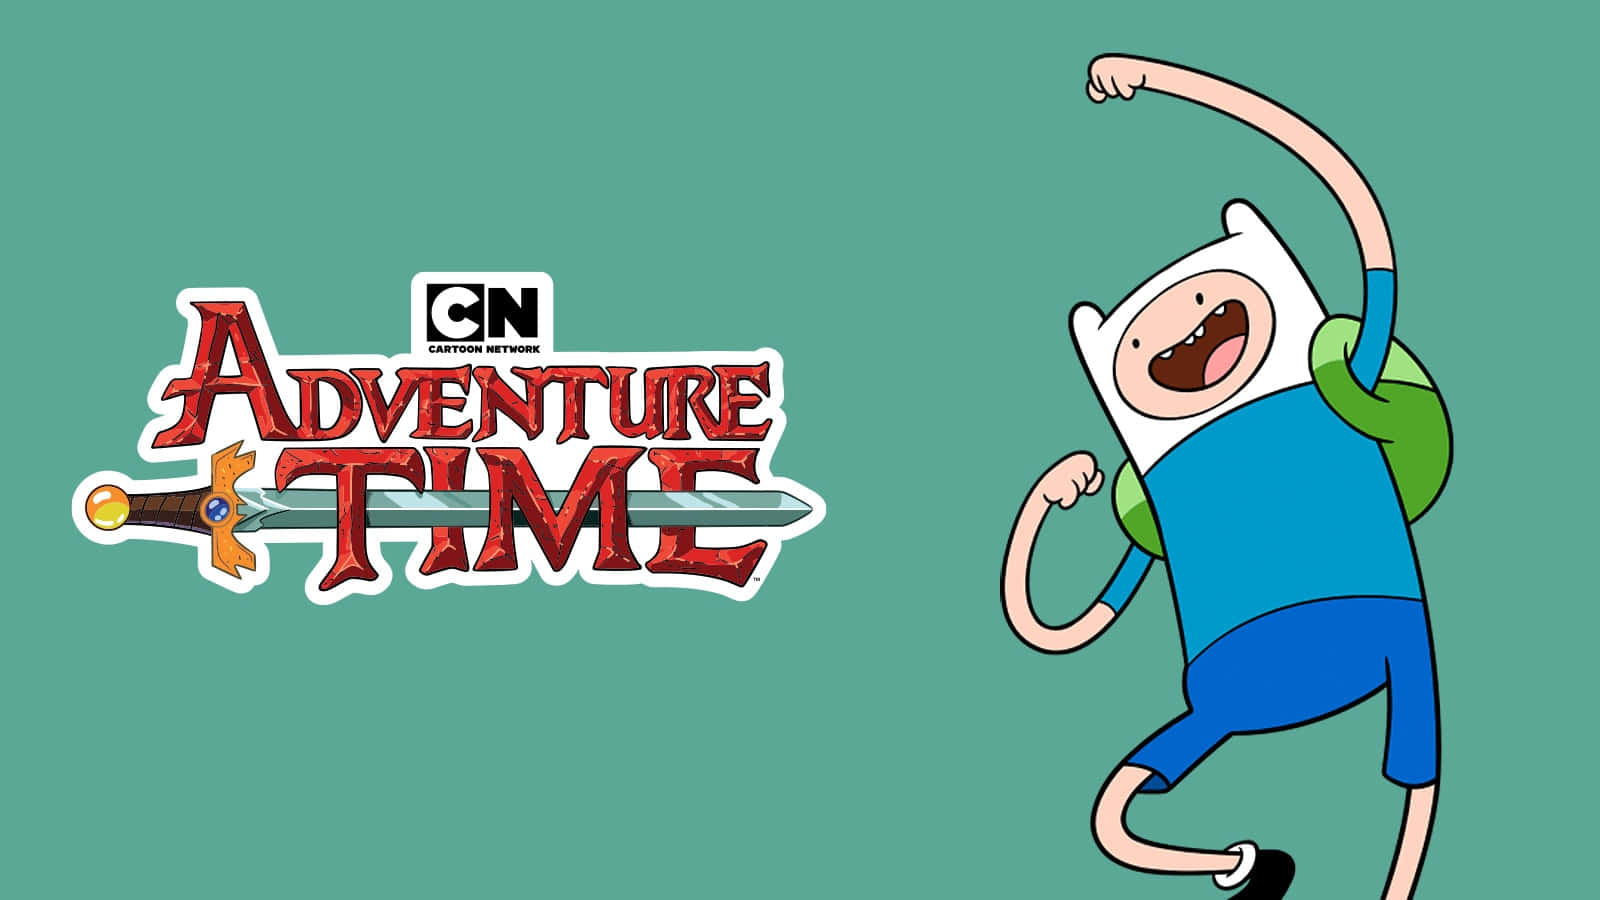 "The Fun Never Stops on Cartoon Network"